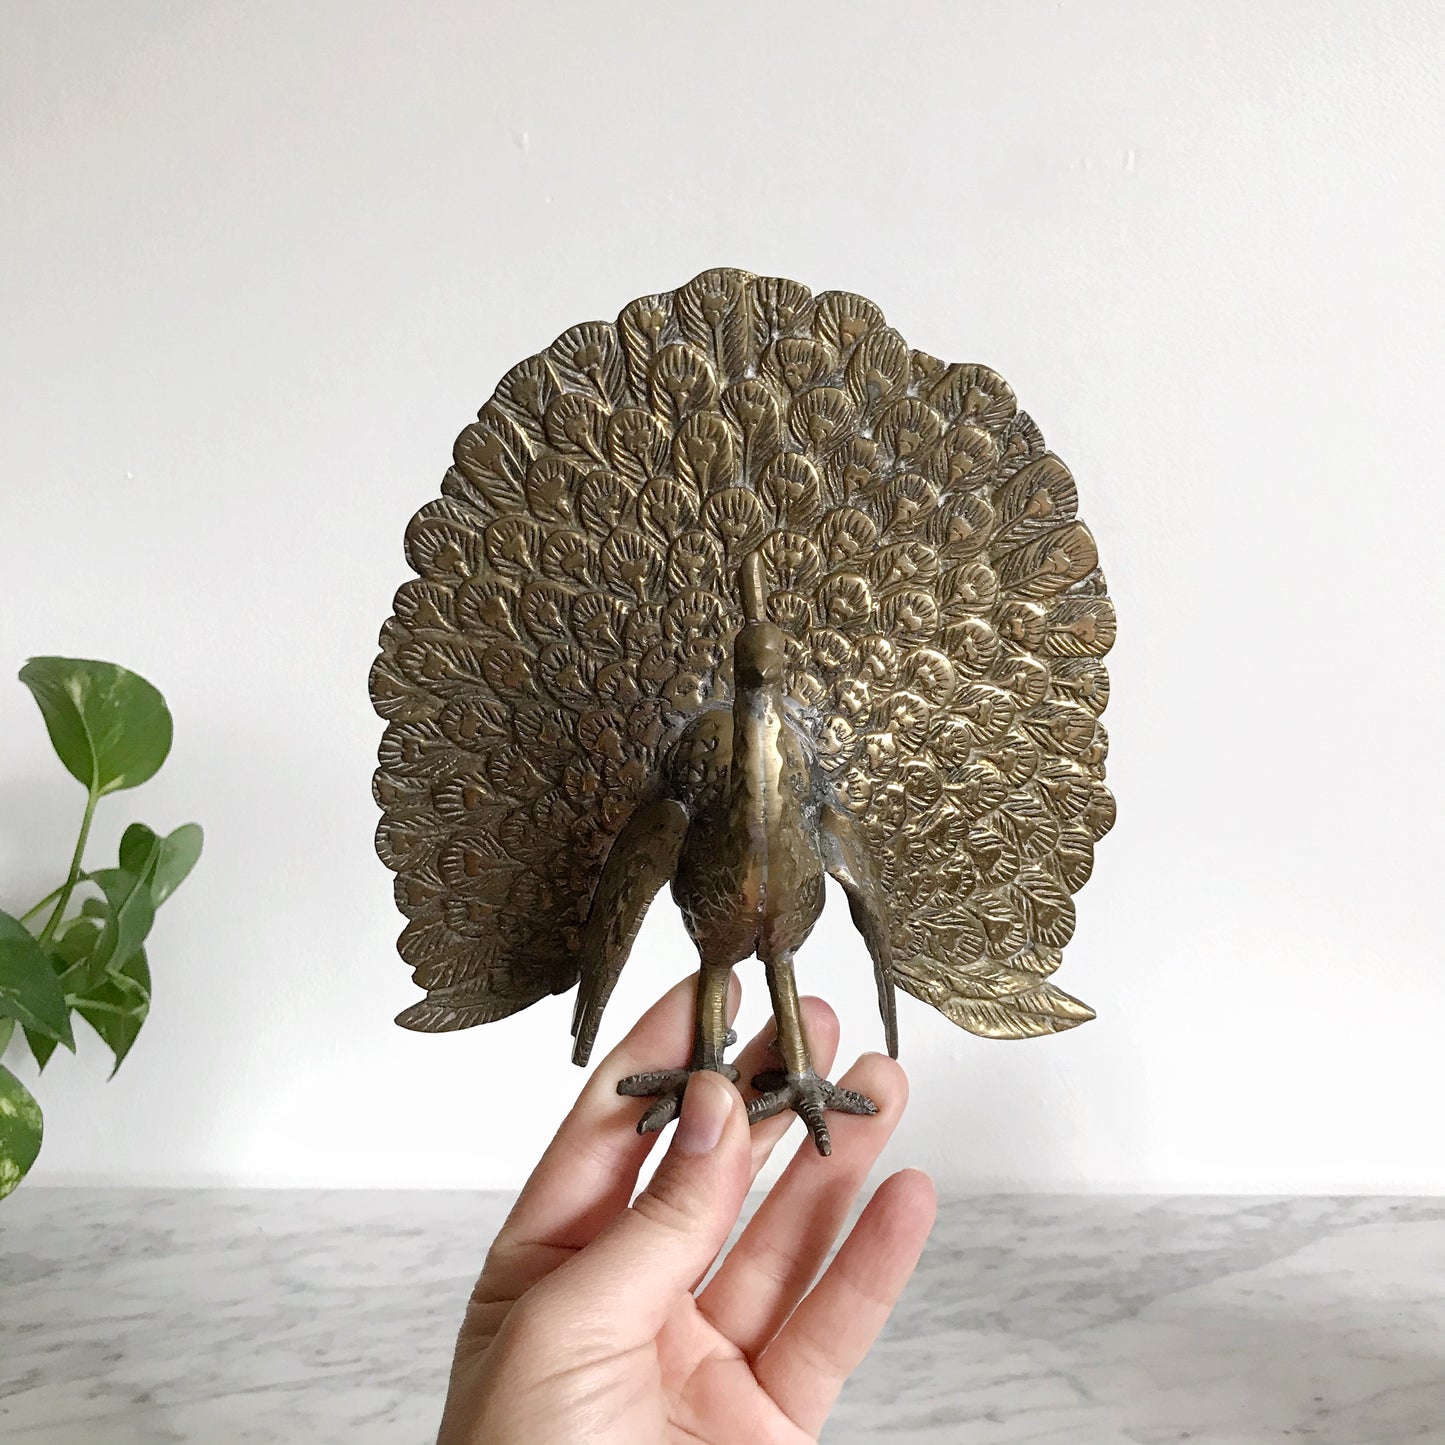 Vintage Brass Peacock Bookends